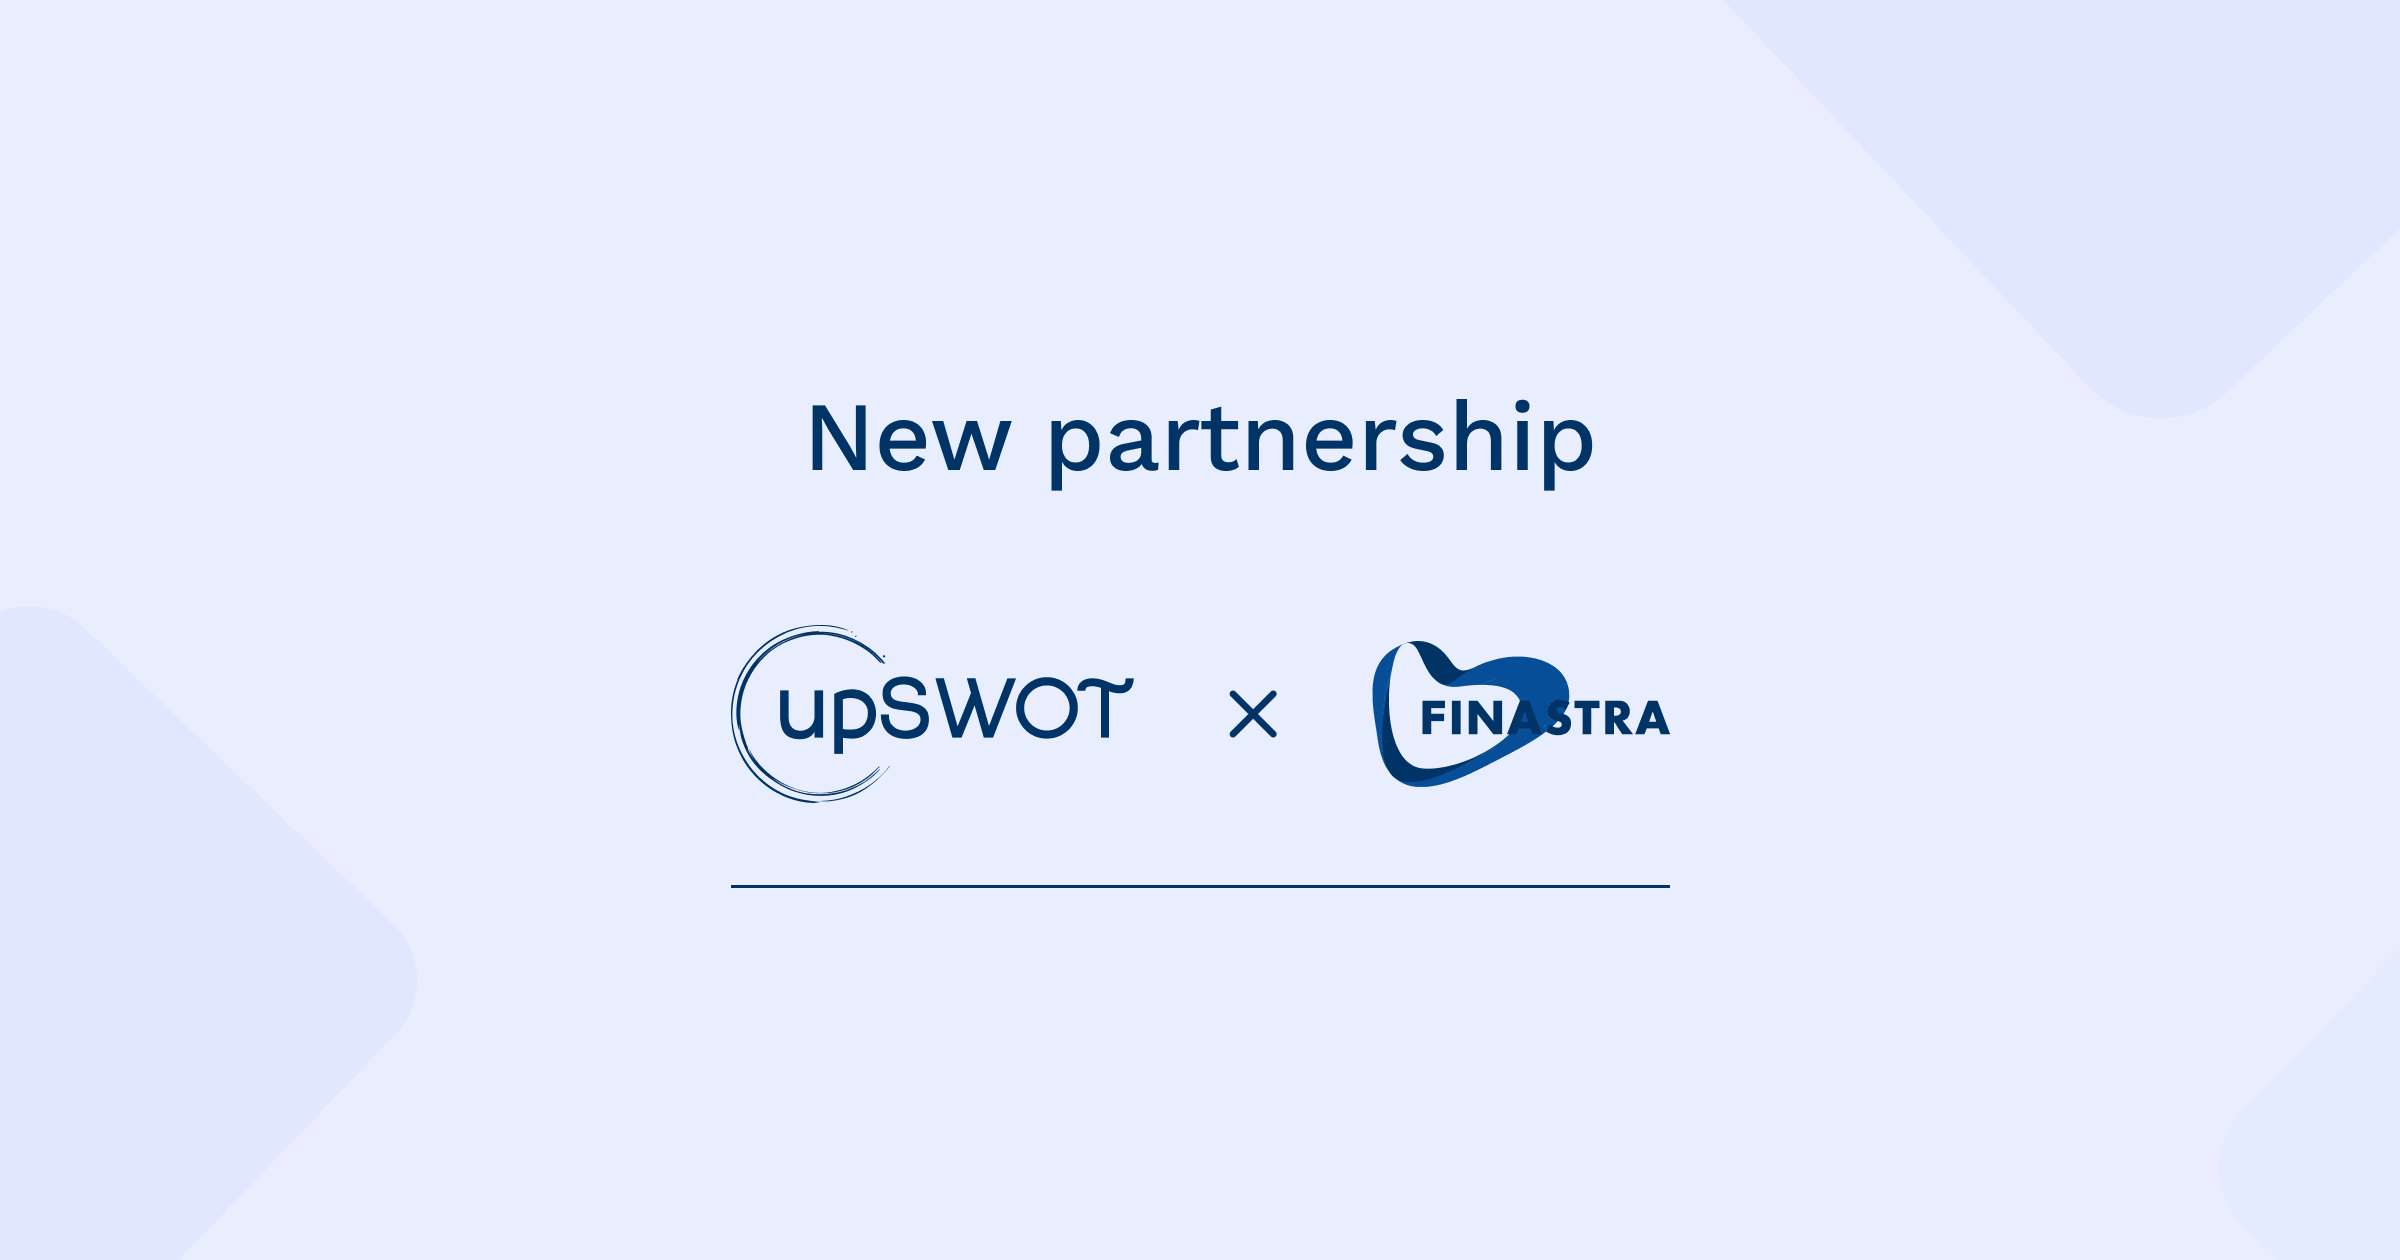 upSWOT And Finastra Are Partnering On bringing The New Generation Of “Embedded Mint For Businesses”